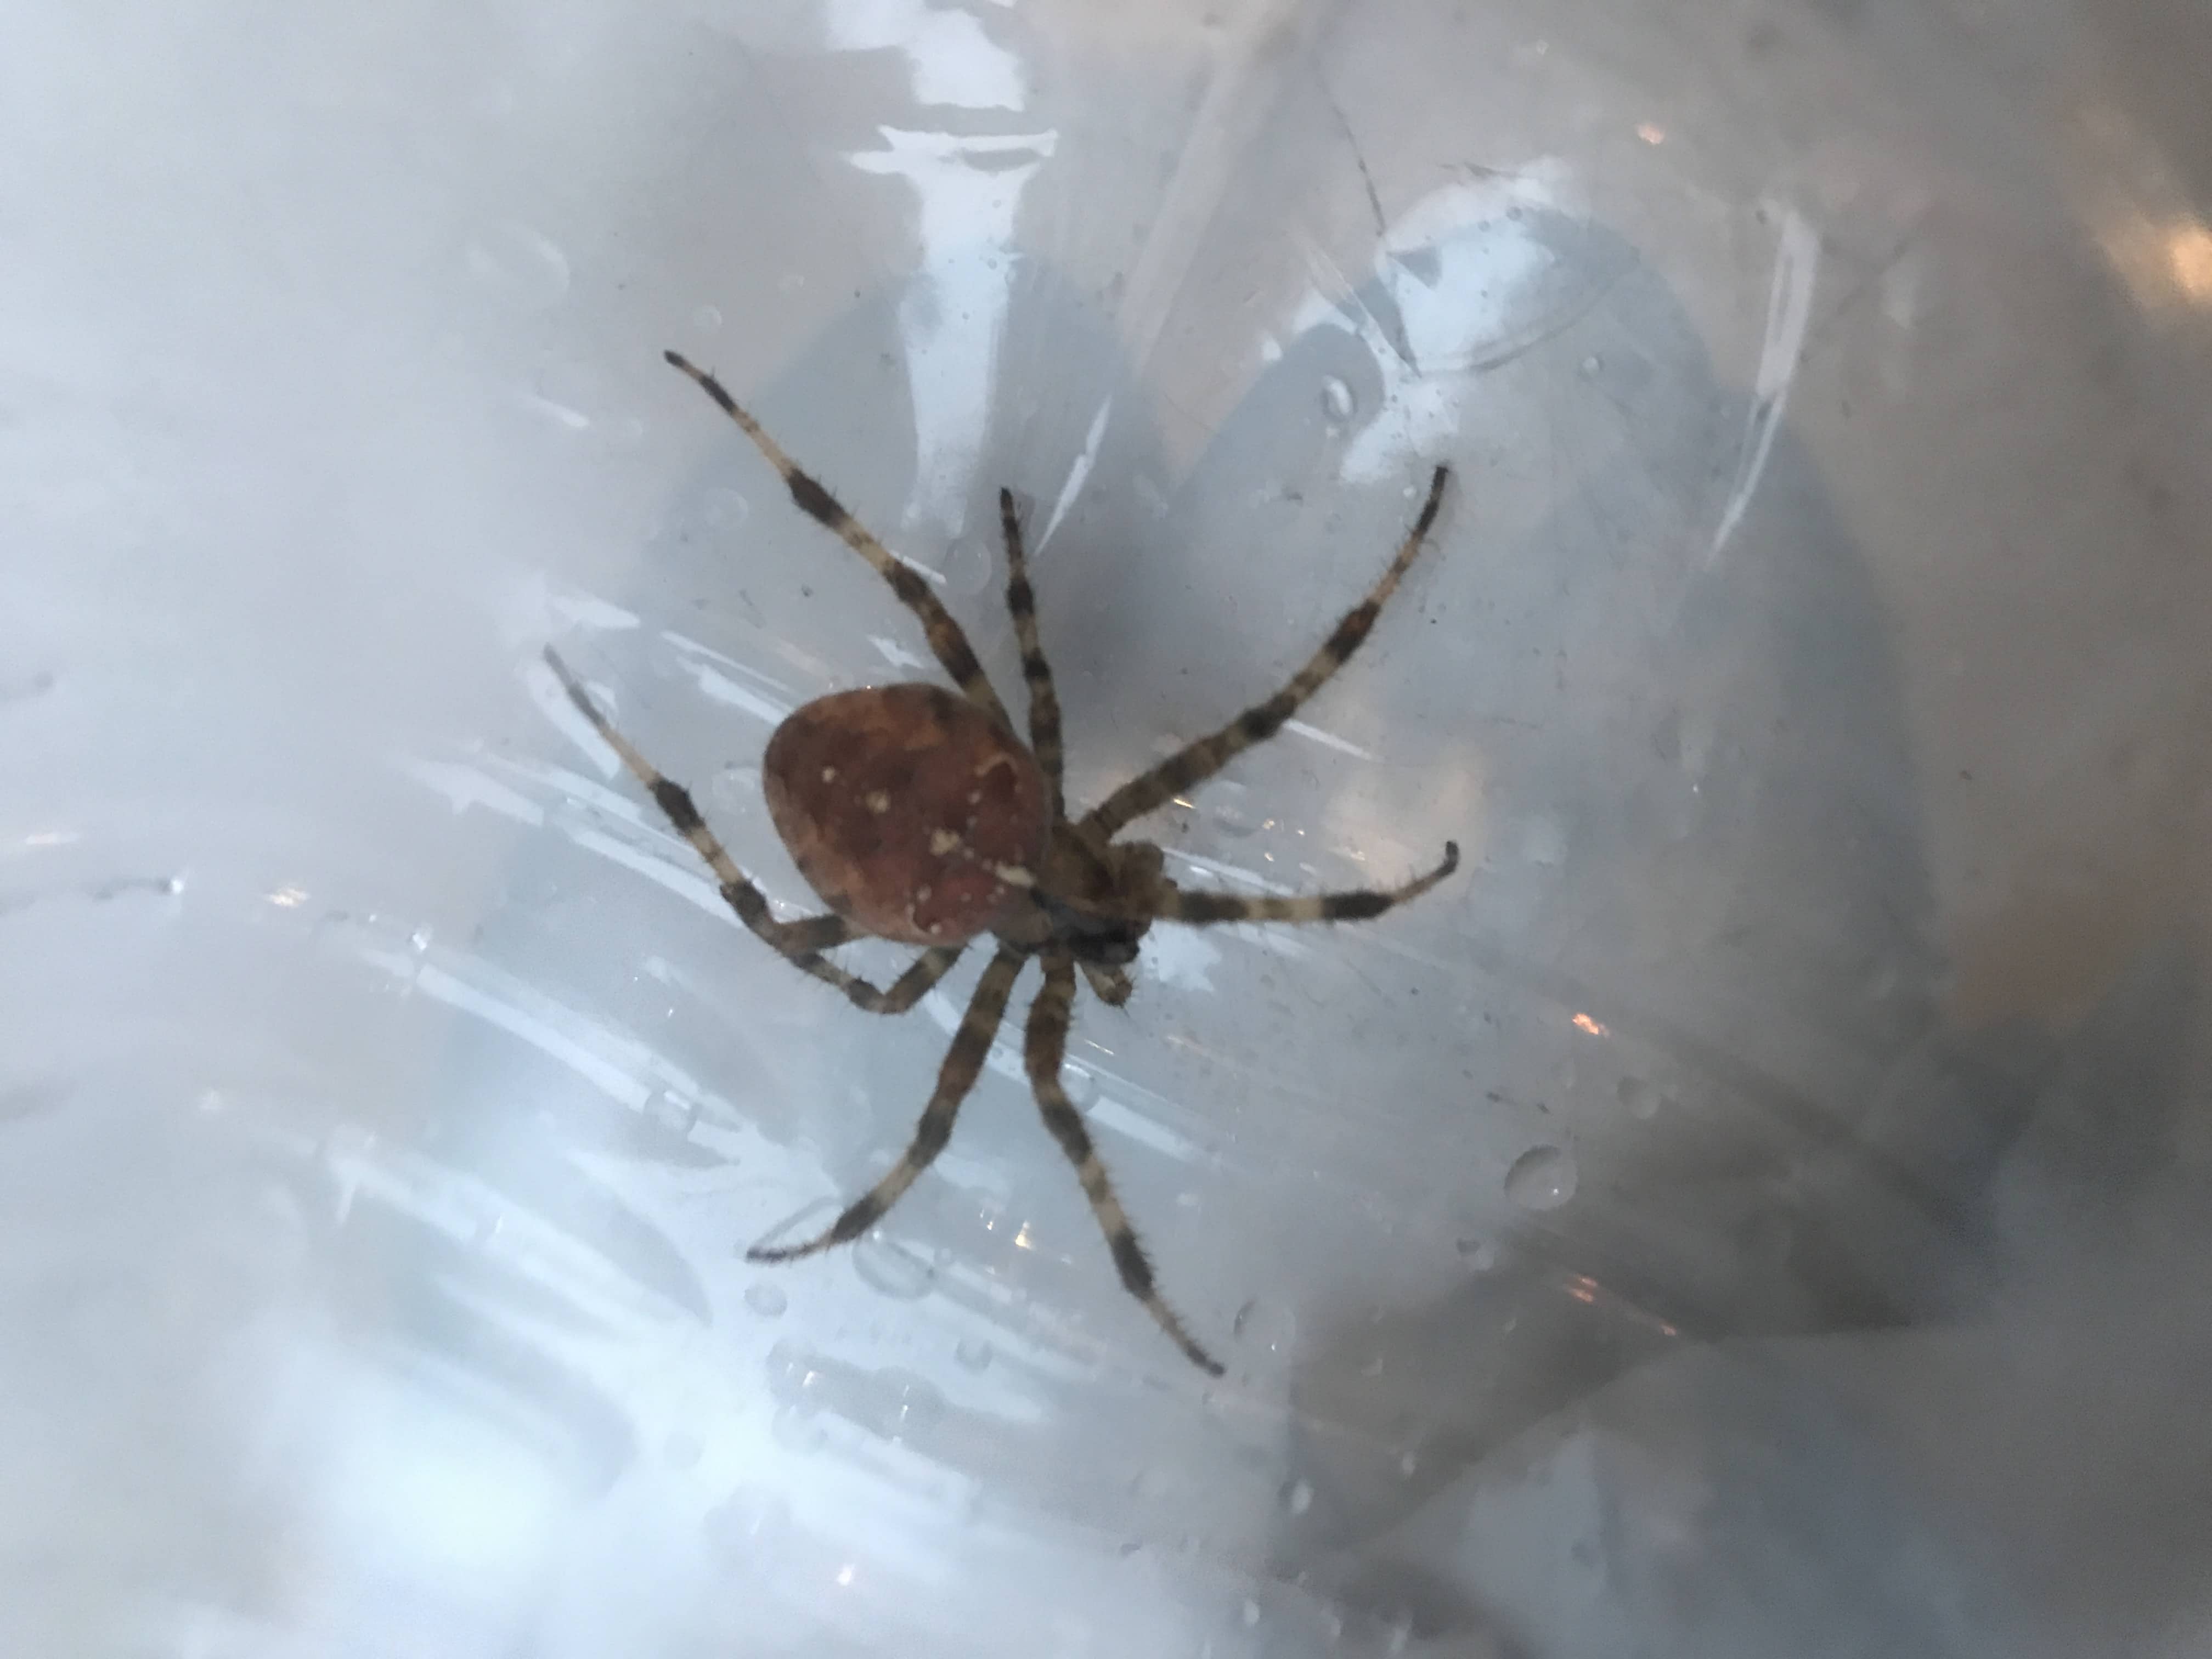 Spiders In Minnesota Species And Pictures